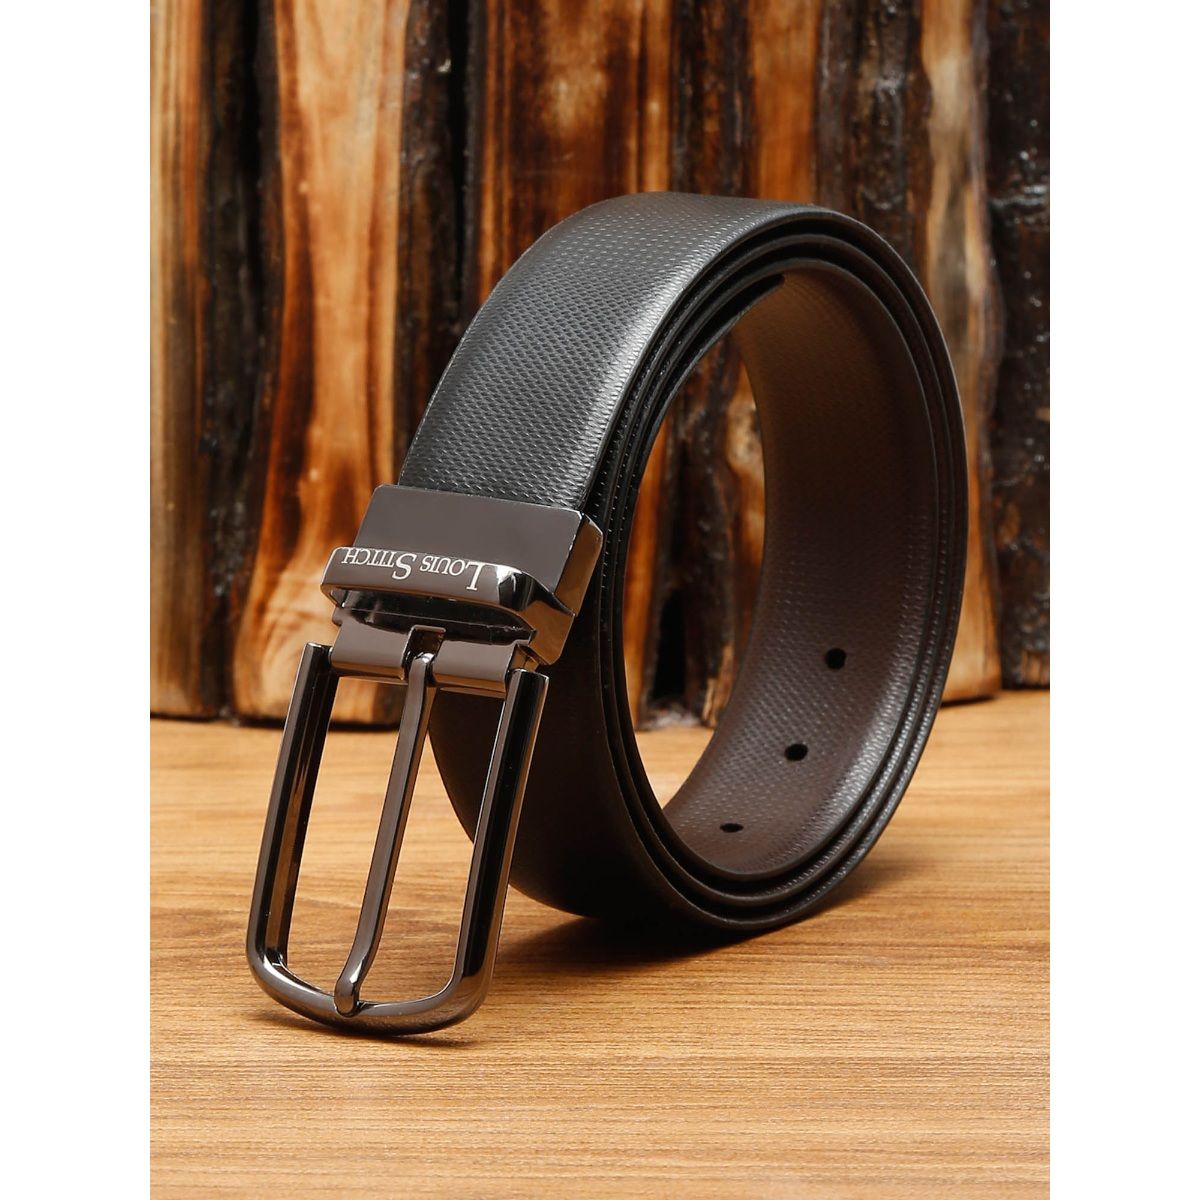 Buy LOUIS STITCH Men's Reversible Italian Leather Belt with for Men 1.25  inch (35mm) Waist Strap Black Brown Belt with Rosewood Buckle (MLRW_GE)  (Size- 28 inch) at .in